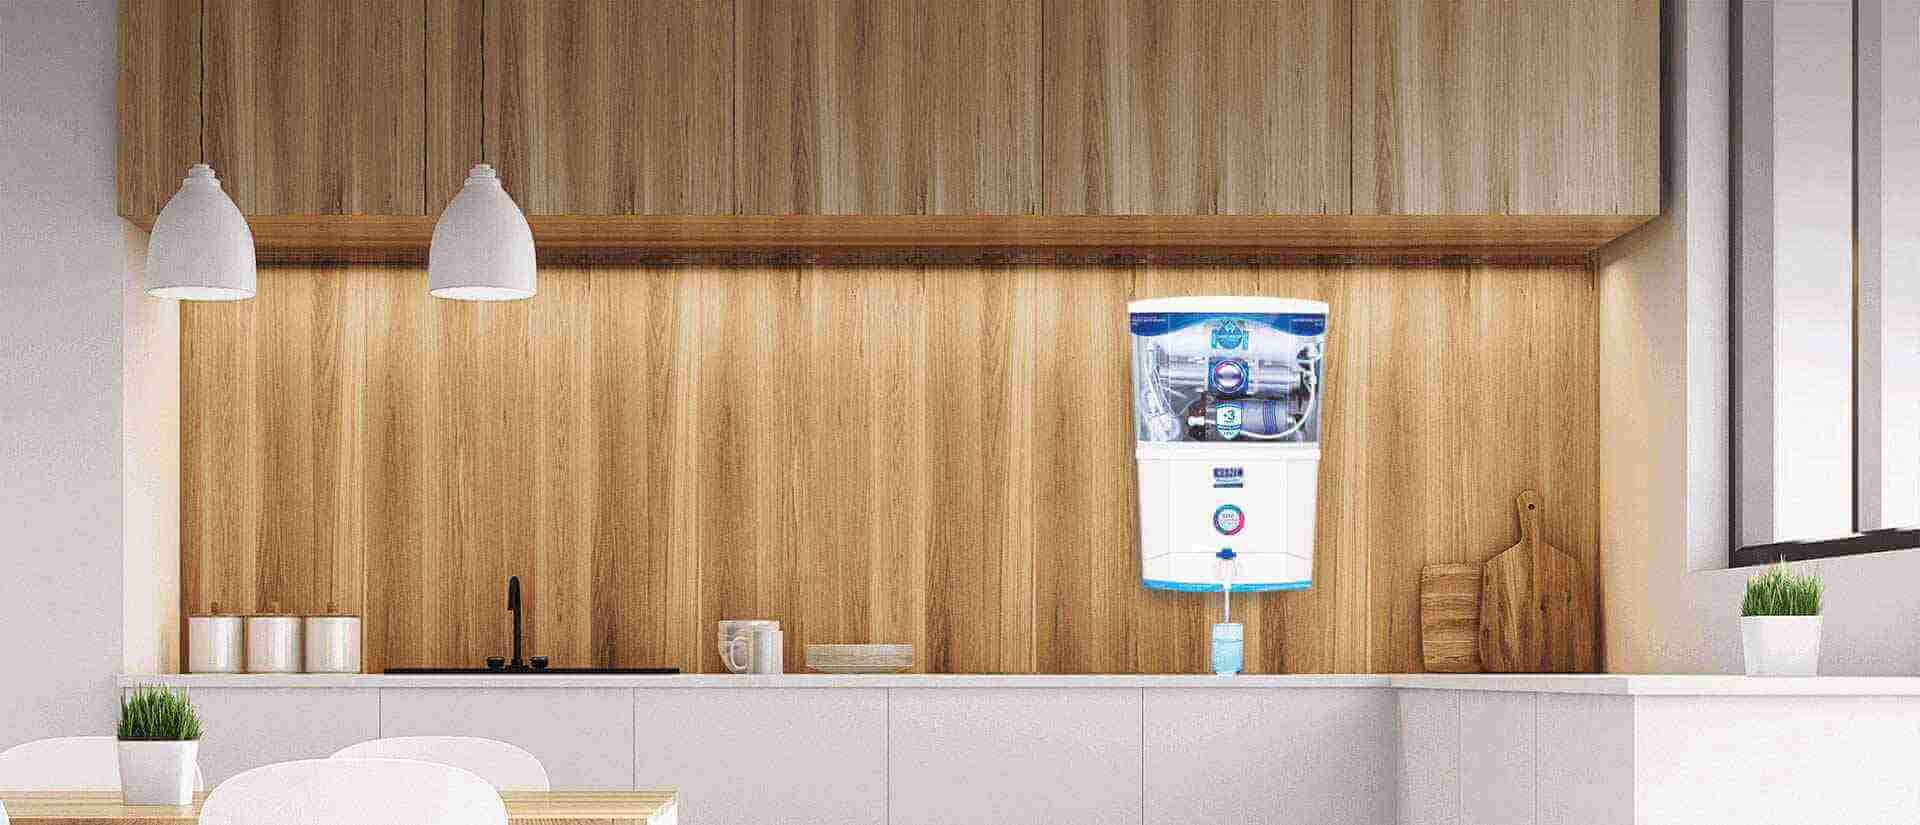 Ro Water Purifiers Buy Kent Ro Purifier System Online At